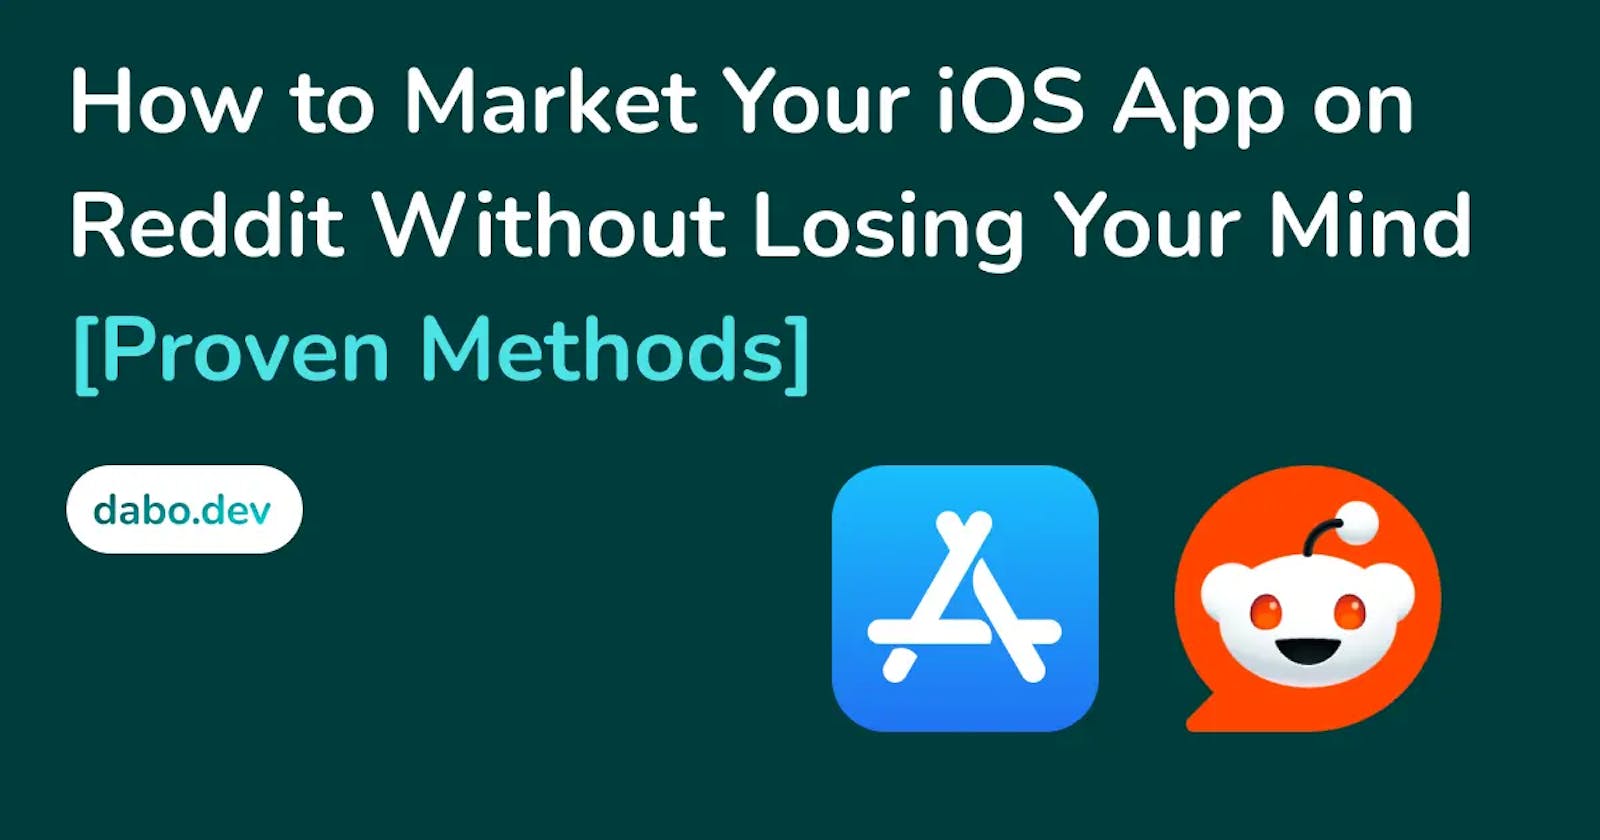 How to Market Your iOS App on Reddit Without Losing Your Mind [Proven Methods]